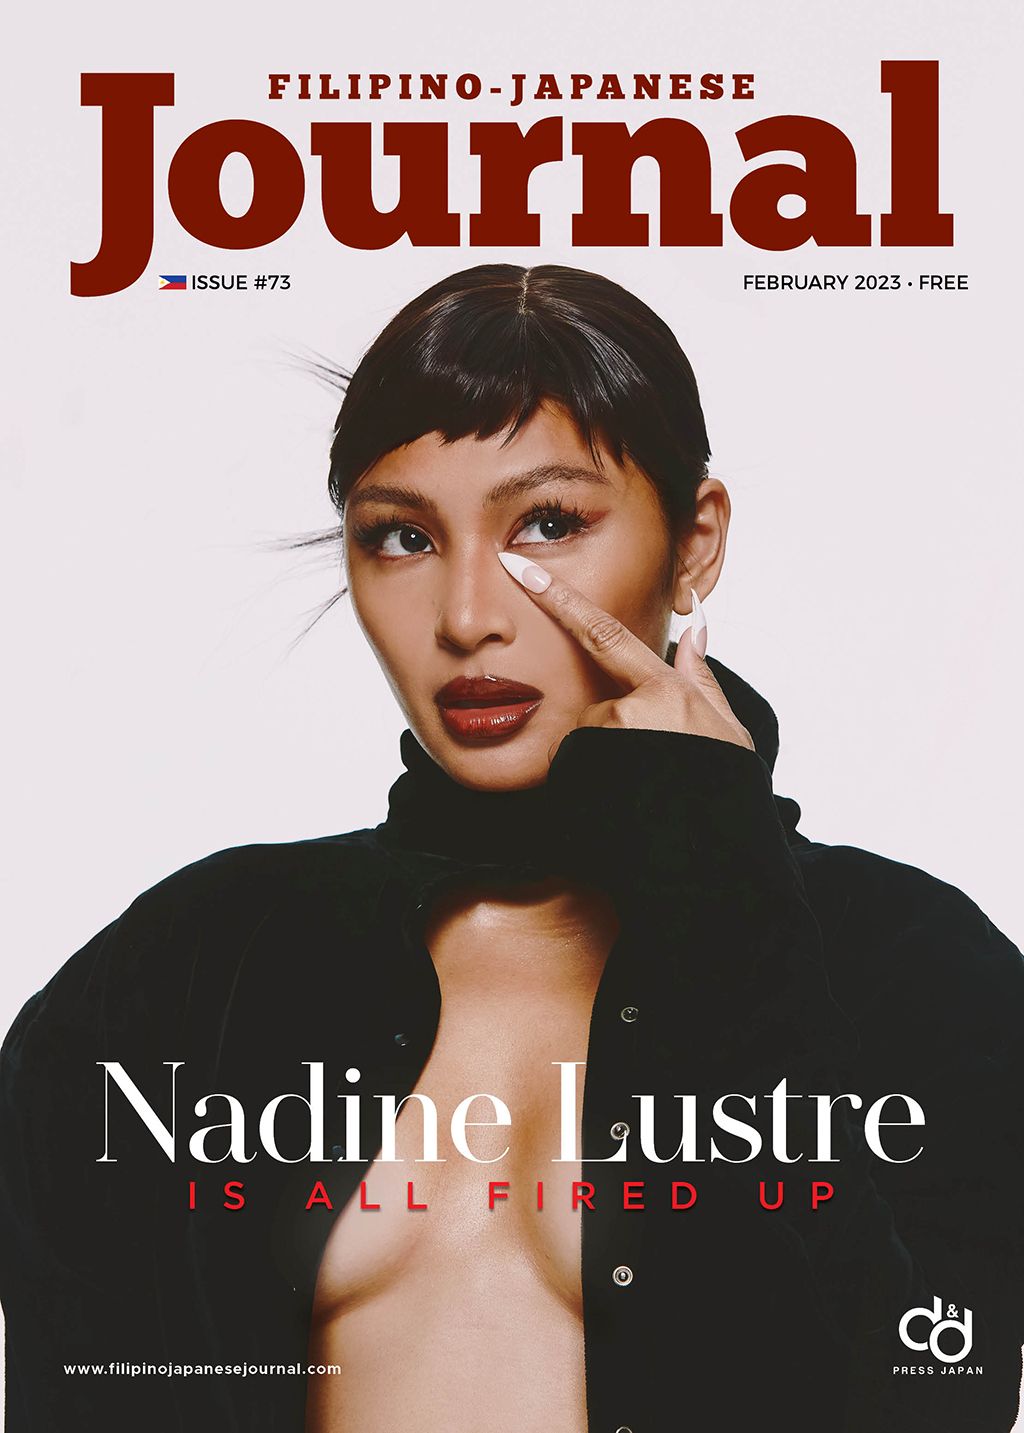 Filipino-Japanese Journal Celebrates its Seventh Anniversary with Nadine Lustre on the Cover